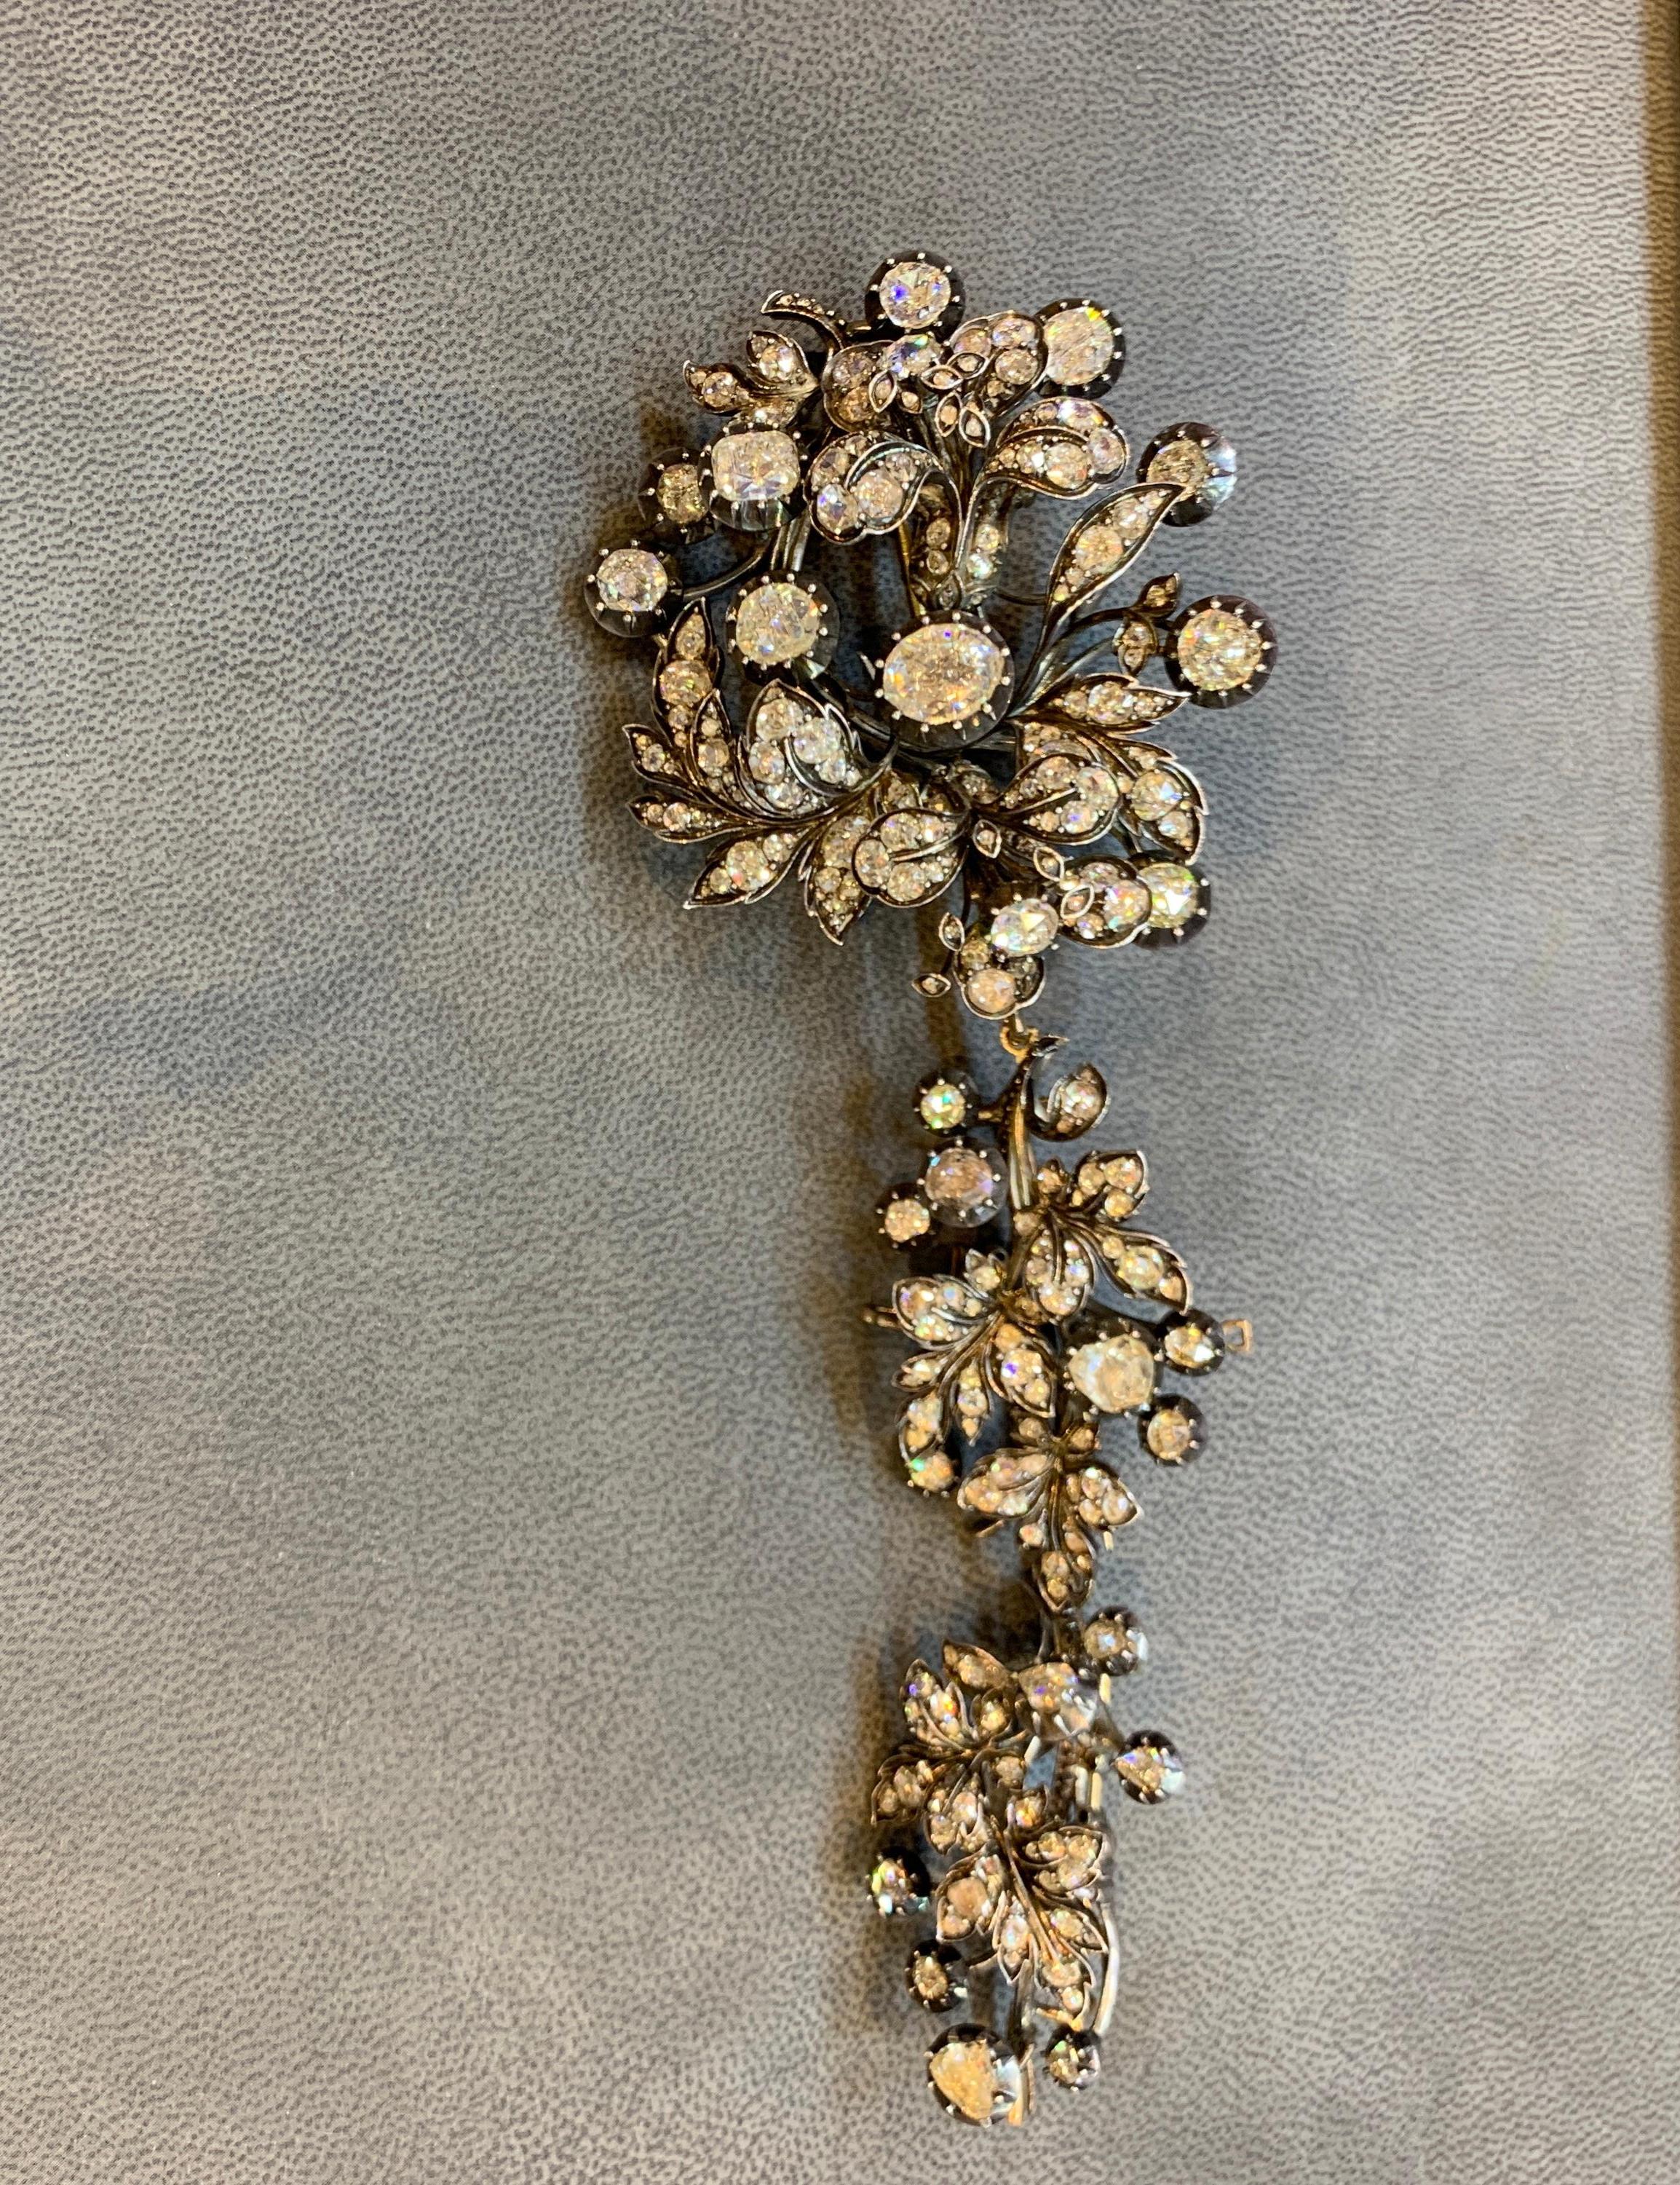 Antique Devant De Corsage Diamond Brooch
Set with approx 28 carats of rose cut diamonds mostly collet set.
Mounted in silver backed gold
Convertible to Three Smaller Brooches
Approx Measurements: 7 inches in length !